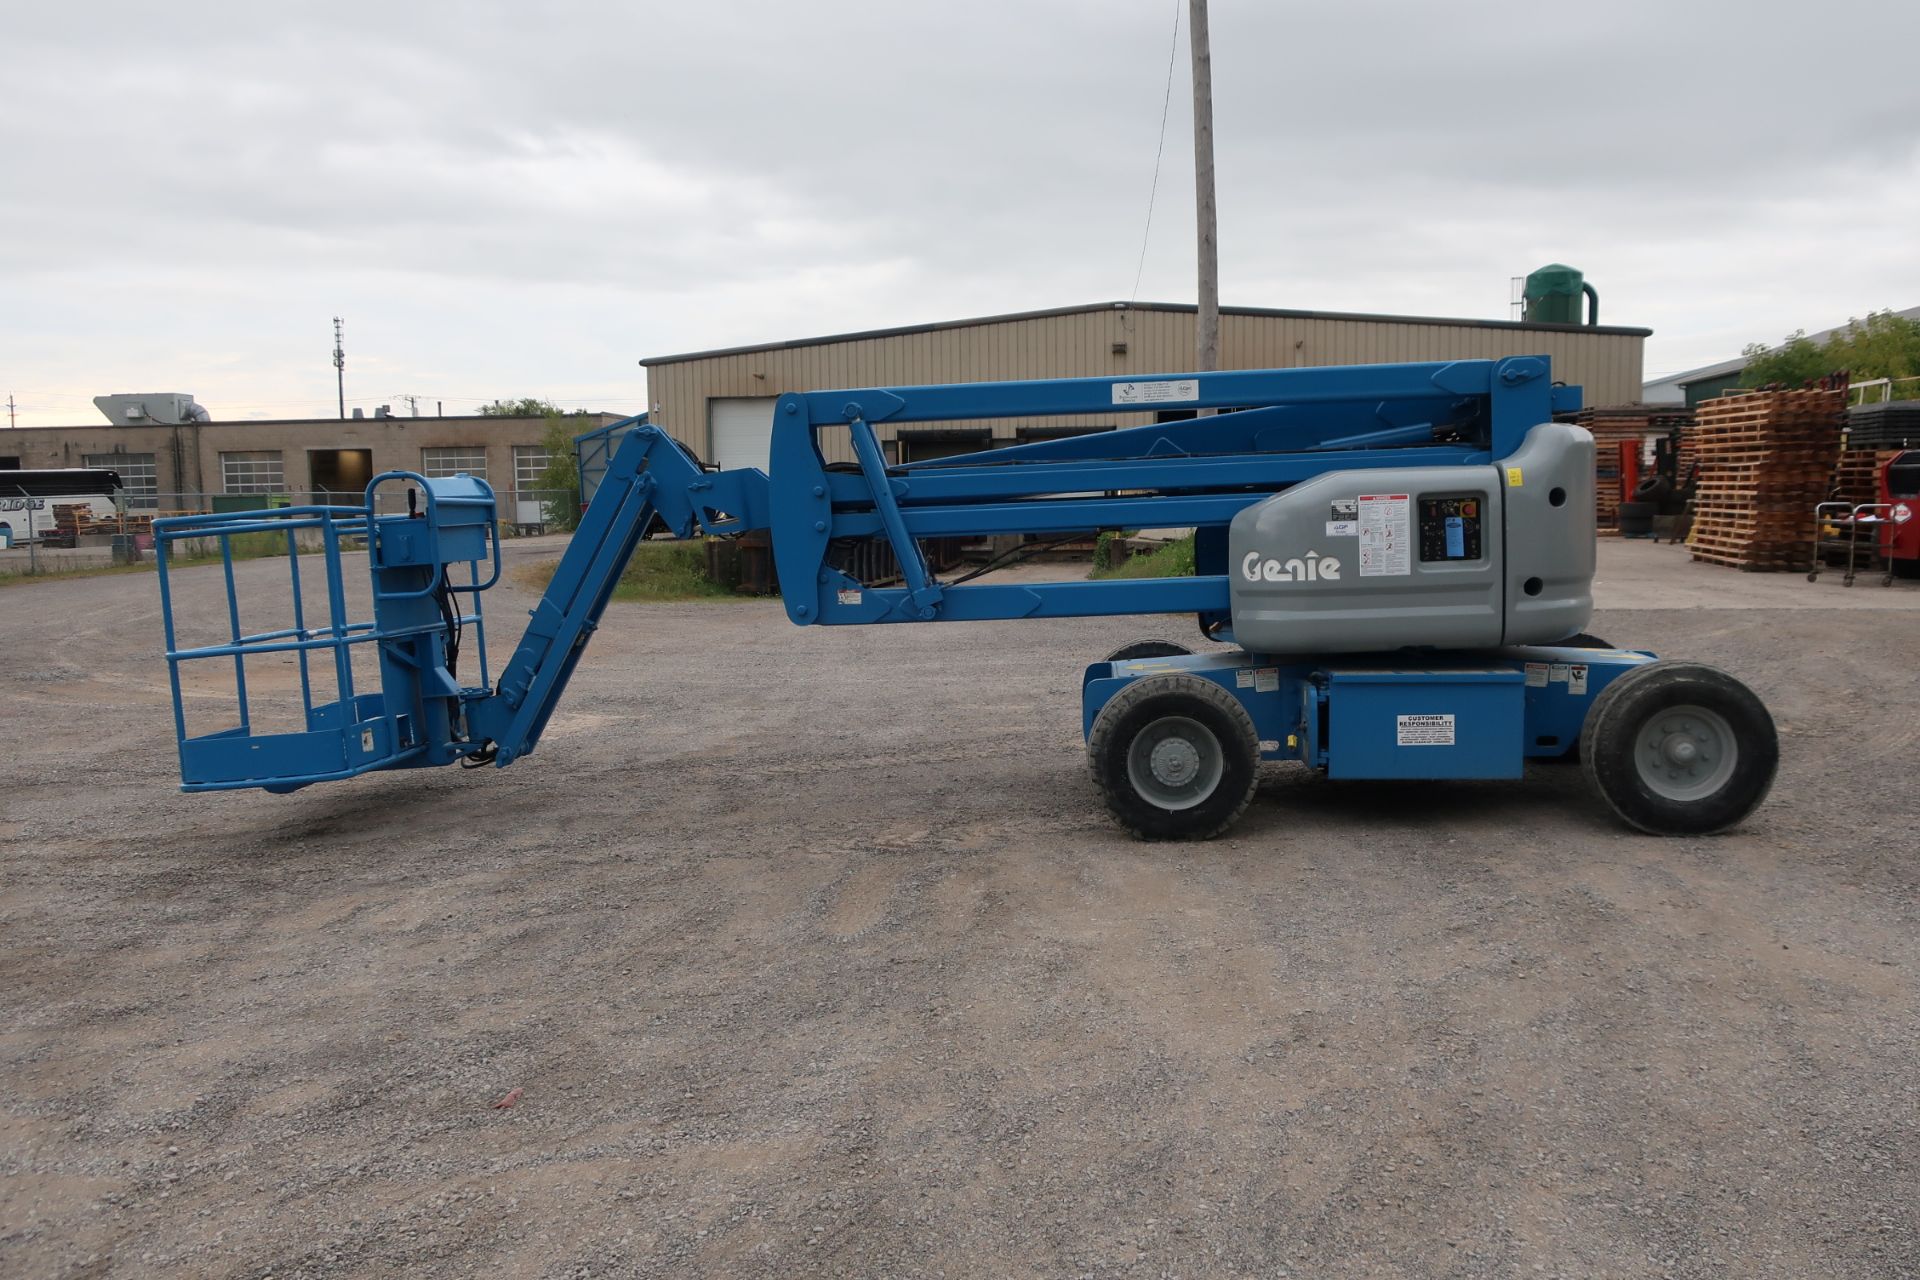 FREE CUSTOMS - MINT Genie Zoom Boom Articulating Lift model Z-45/25 45' height Electric LOW HOURS